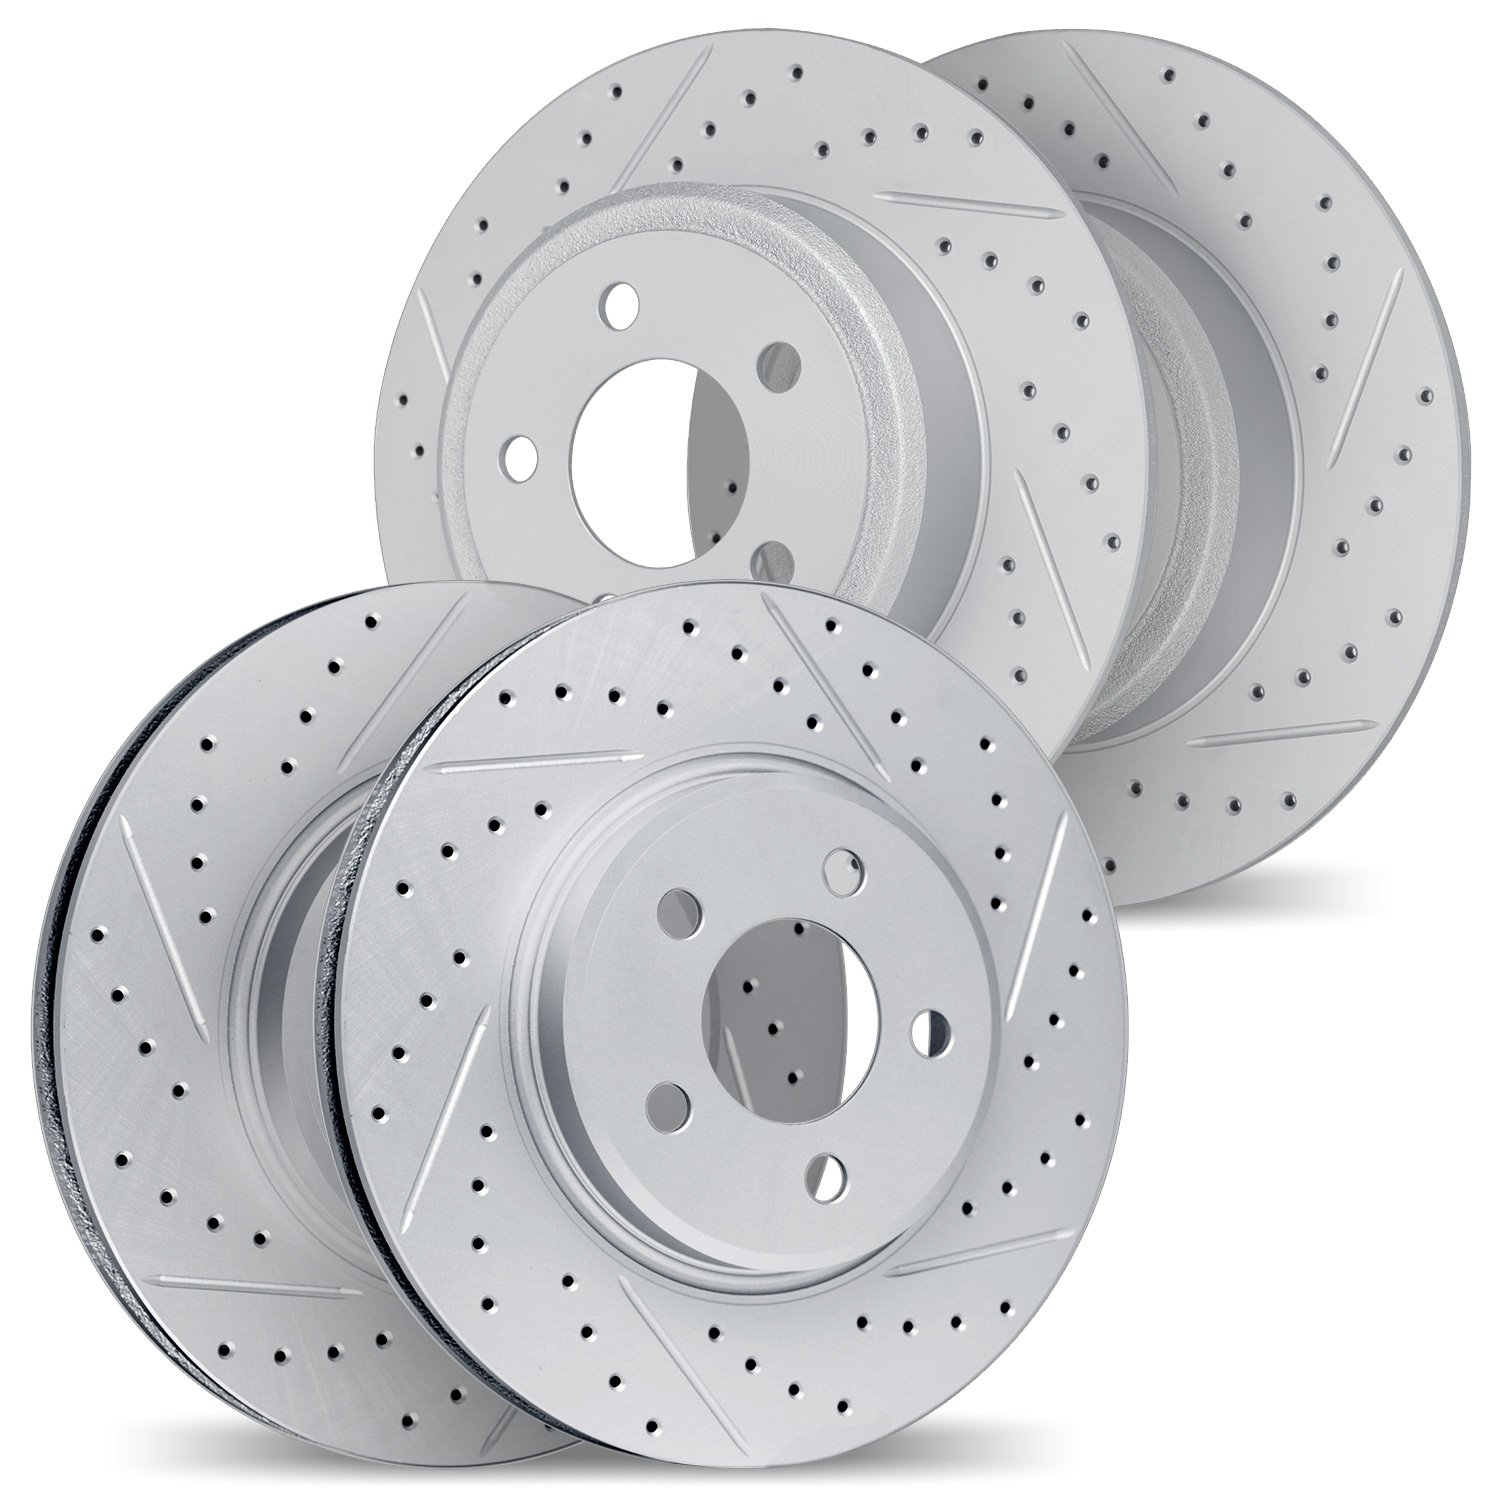 2004-42021 Geoperformance Drilled/Slotted Brake Rotors, 2007-2018 Mopar, Position: Front and Rear